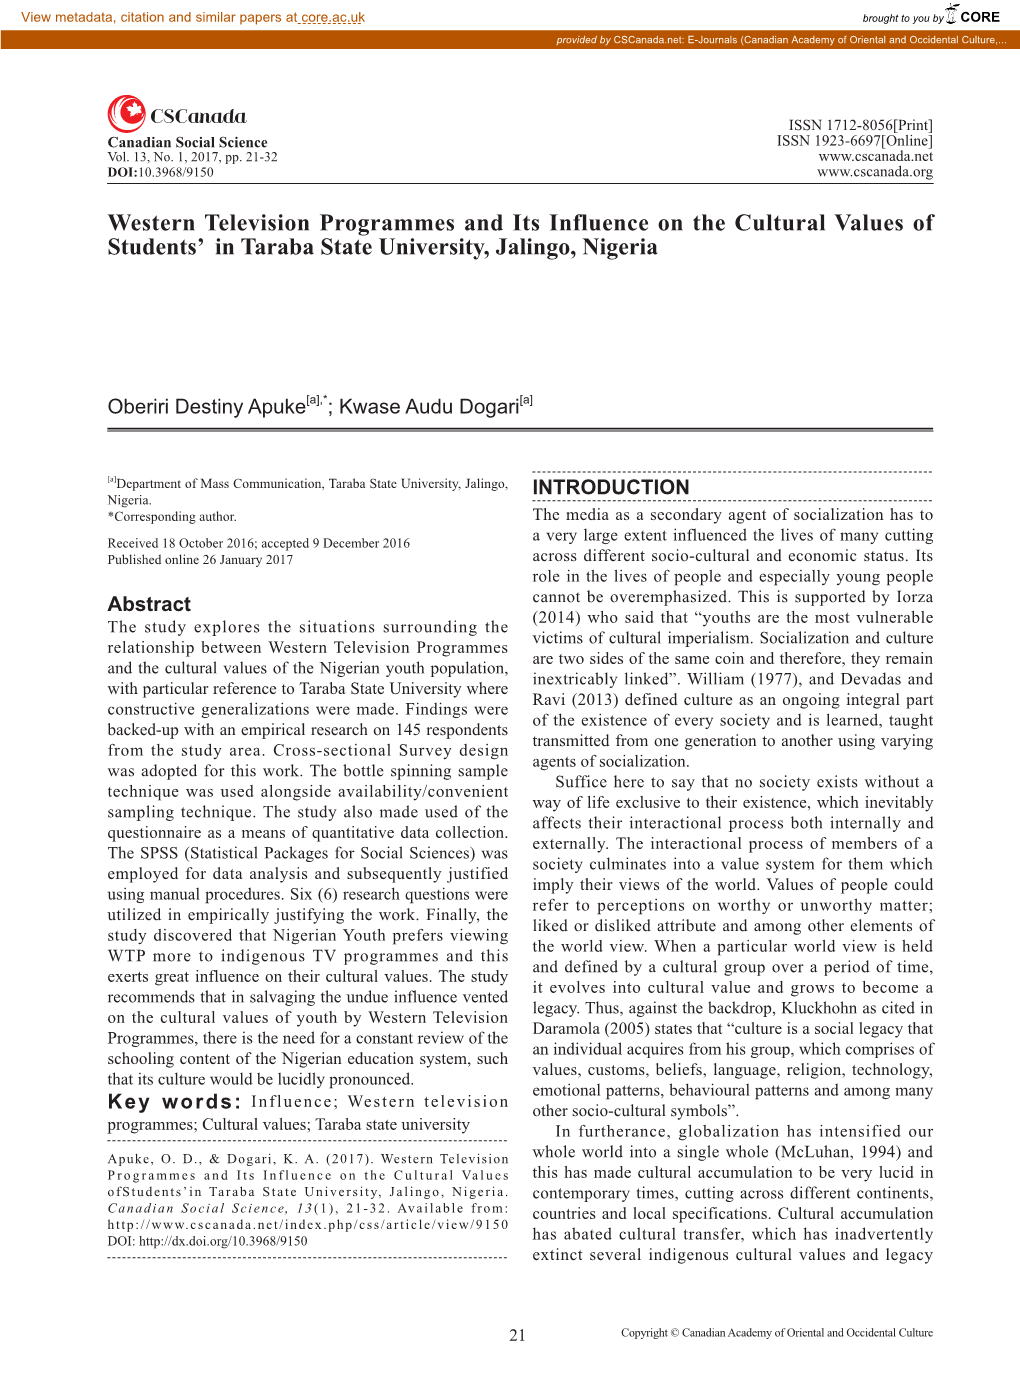 Western Television Programmes and Its Influence on the Cultural Values of Students’ in Taraba State University, Jalingo, Nigeria